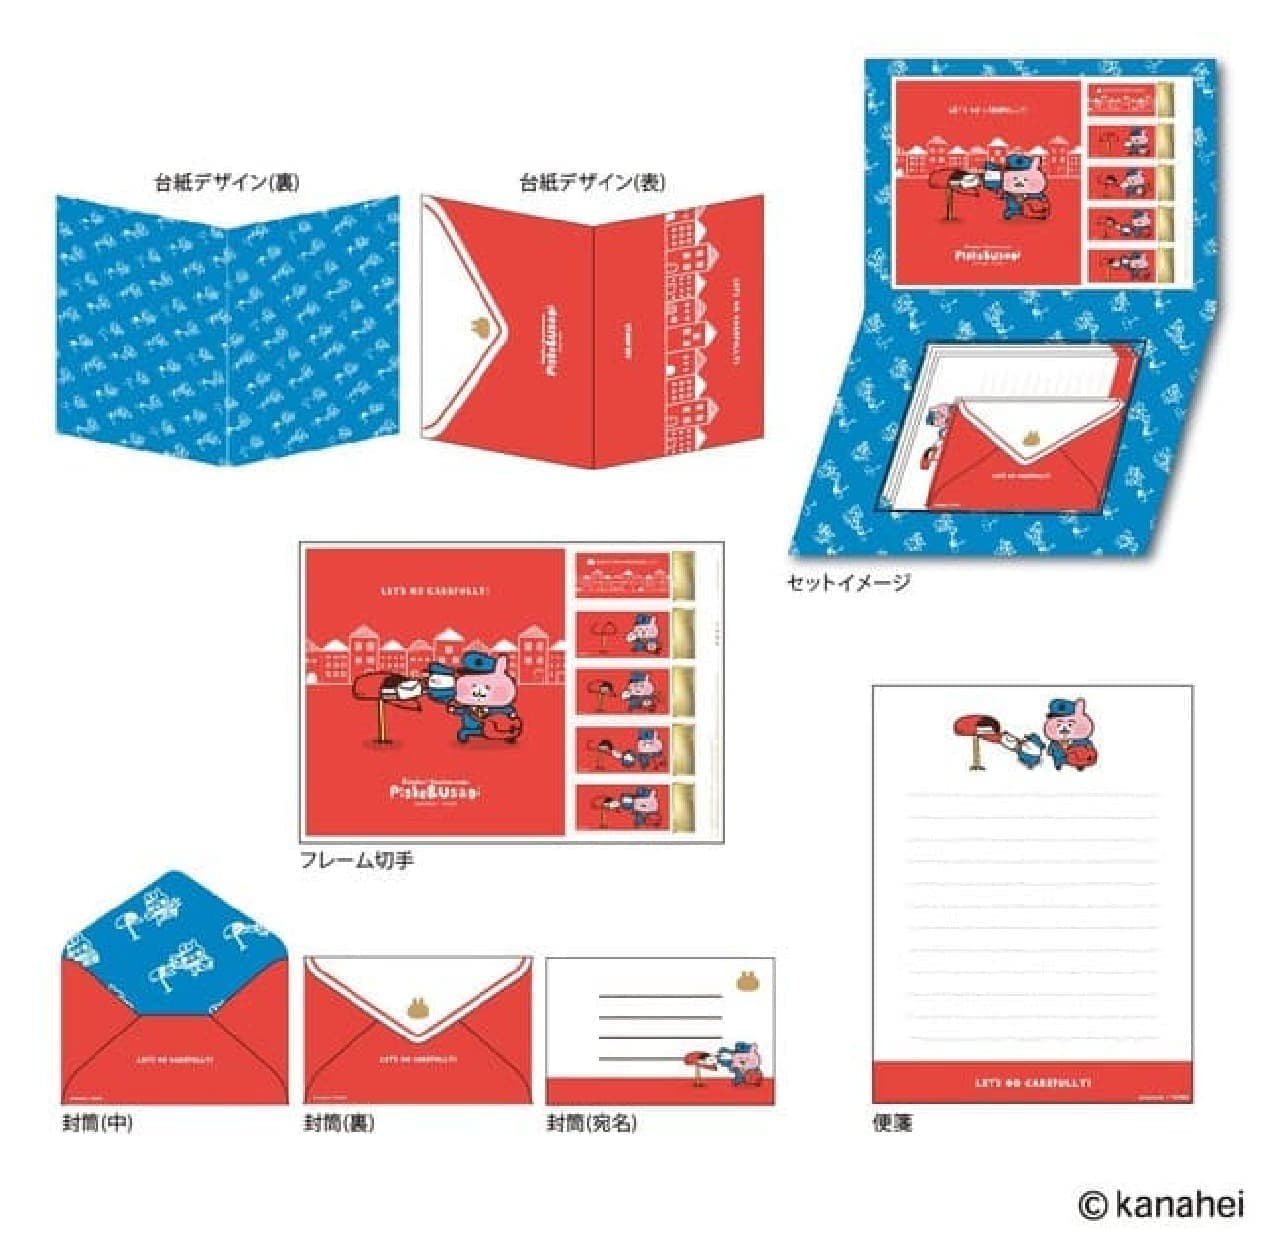 Post Office "Kanahei 20th Anniversary Commemorative Goods" frame stamp set, plush toy, hand towel, pouch, sticker